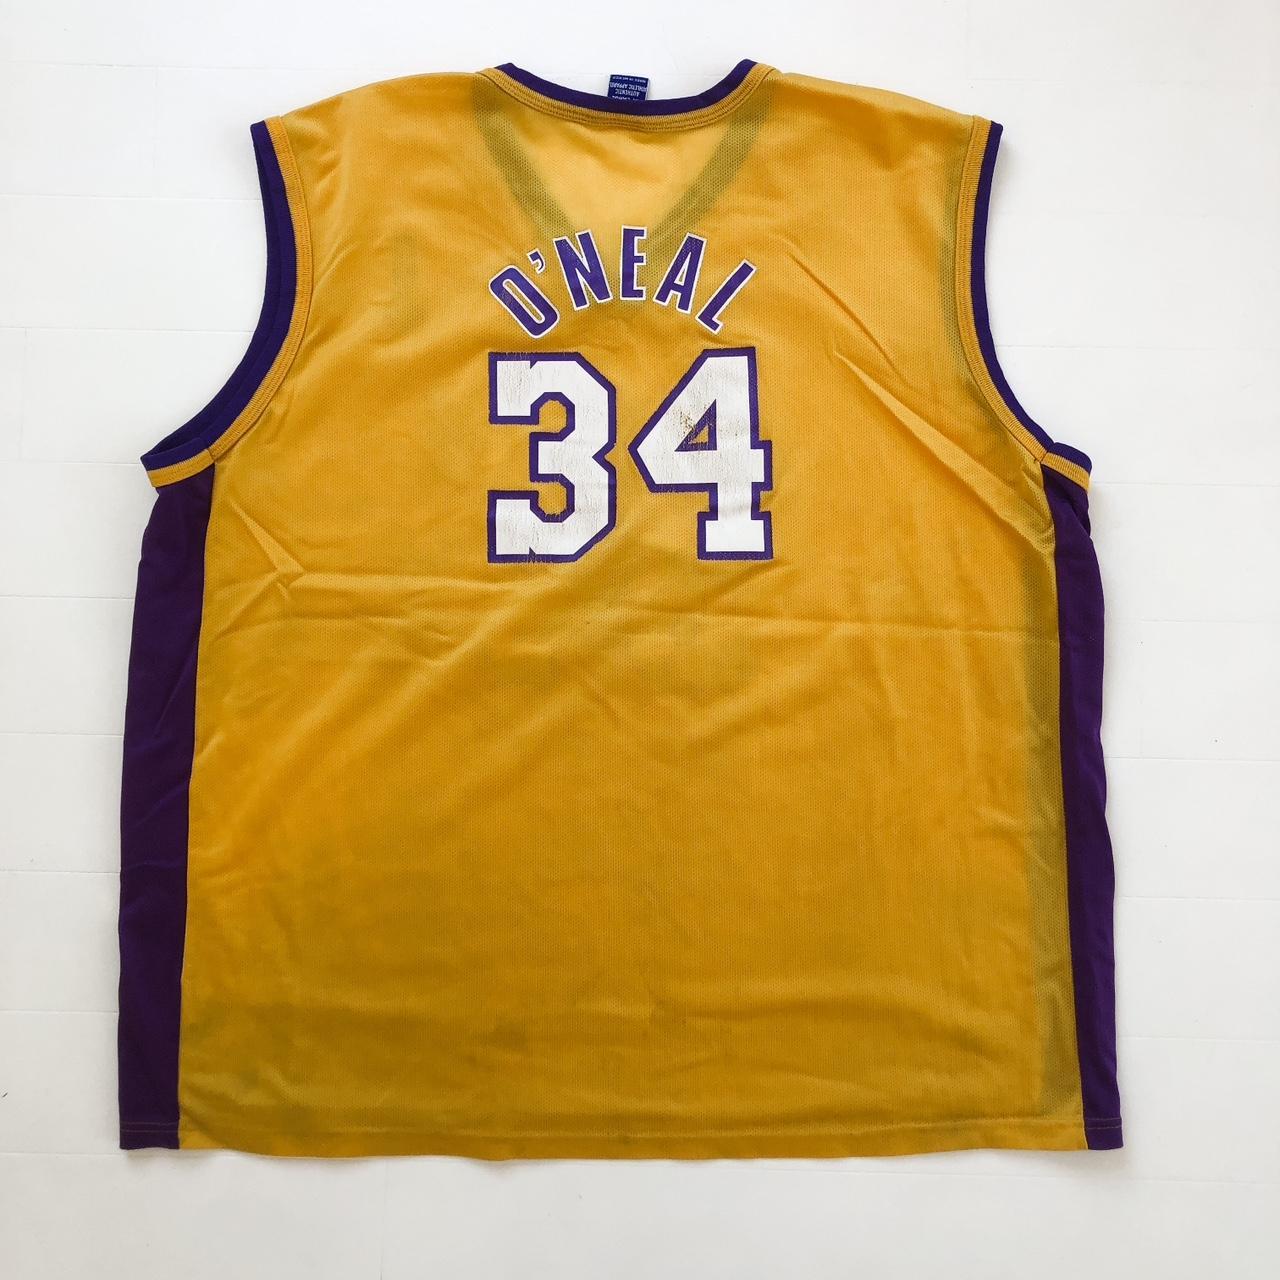 Vintage Champion Brand Los Angeles Lakers Shaquille O'Neal Jersey